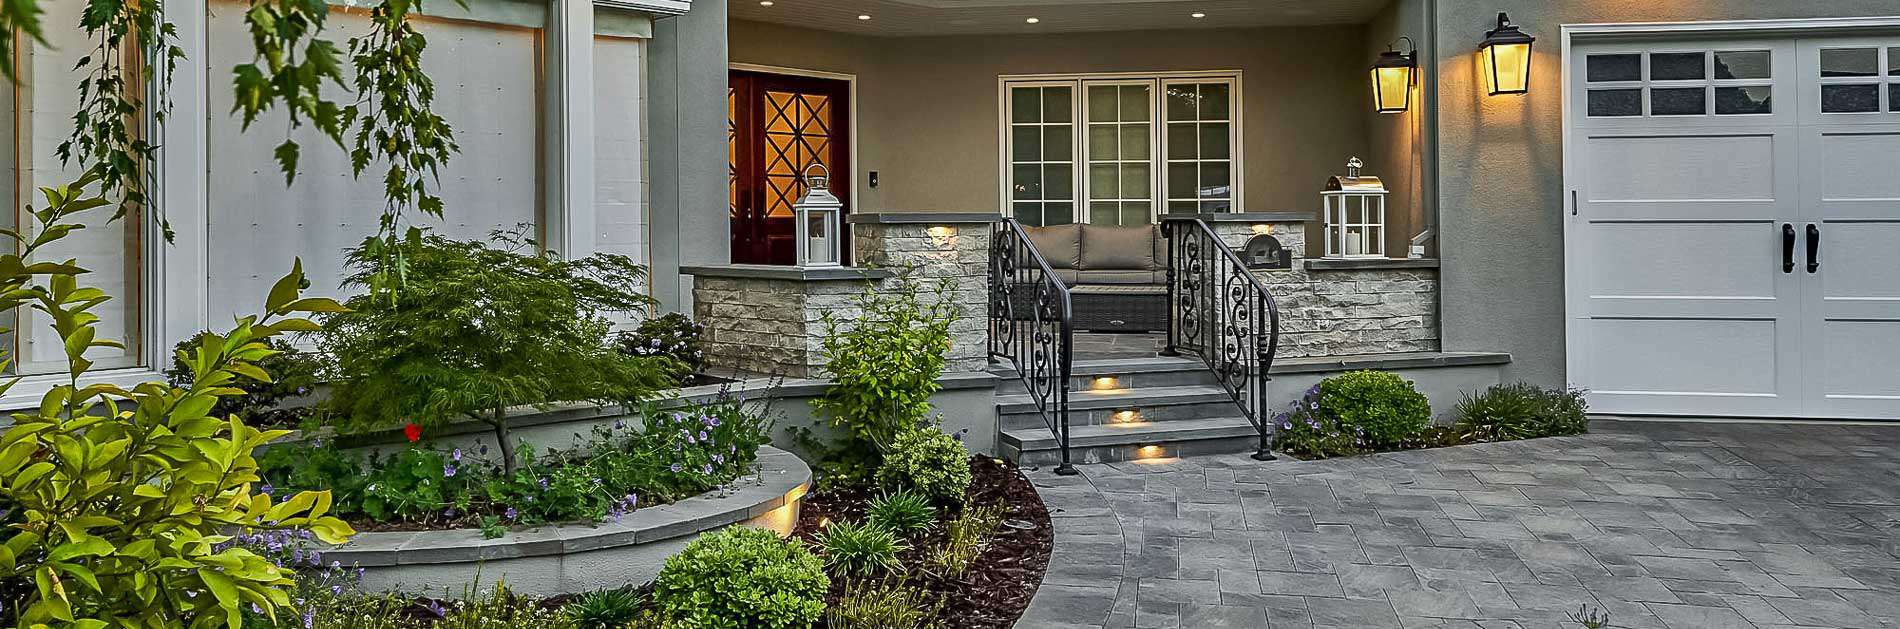 Front entryway with flagstone driveway and landscaped garden feature